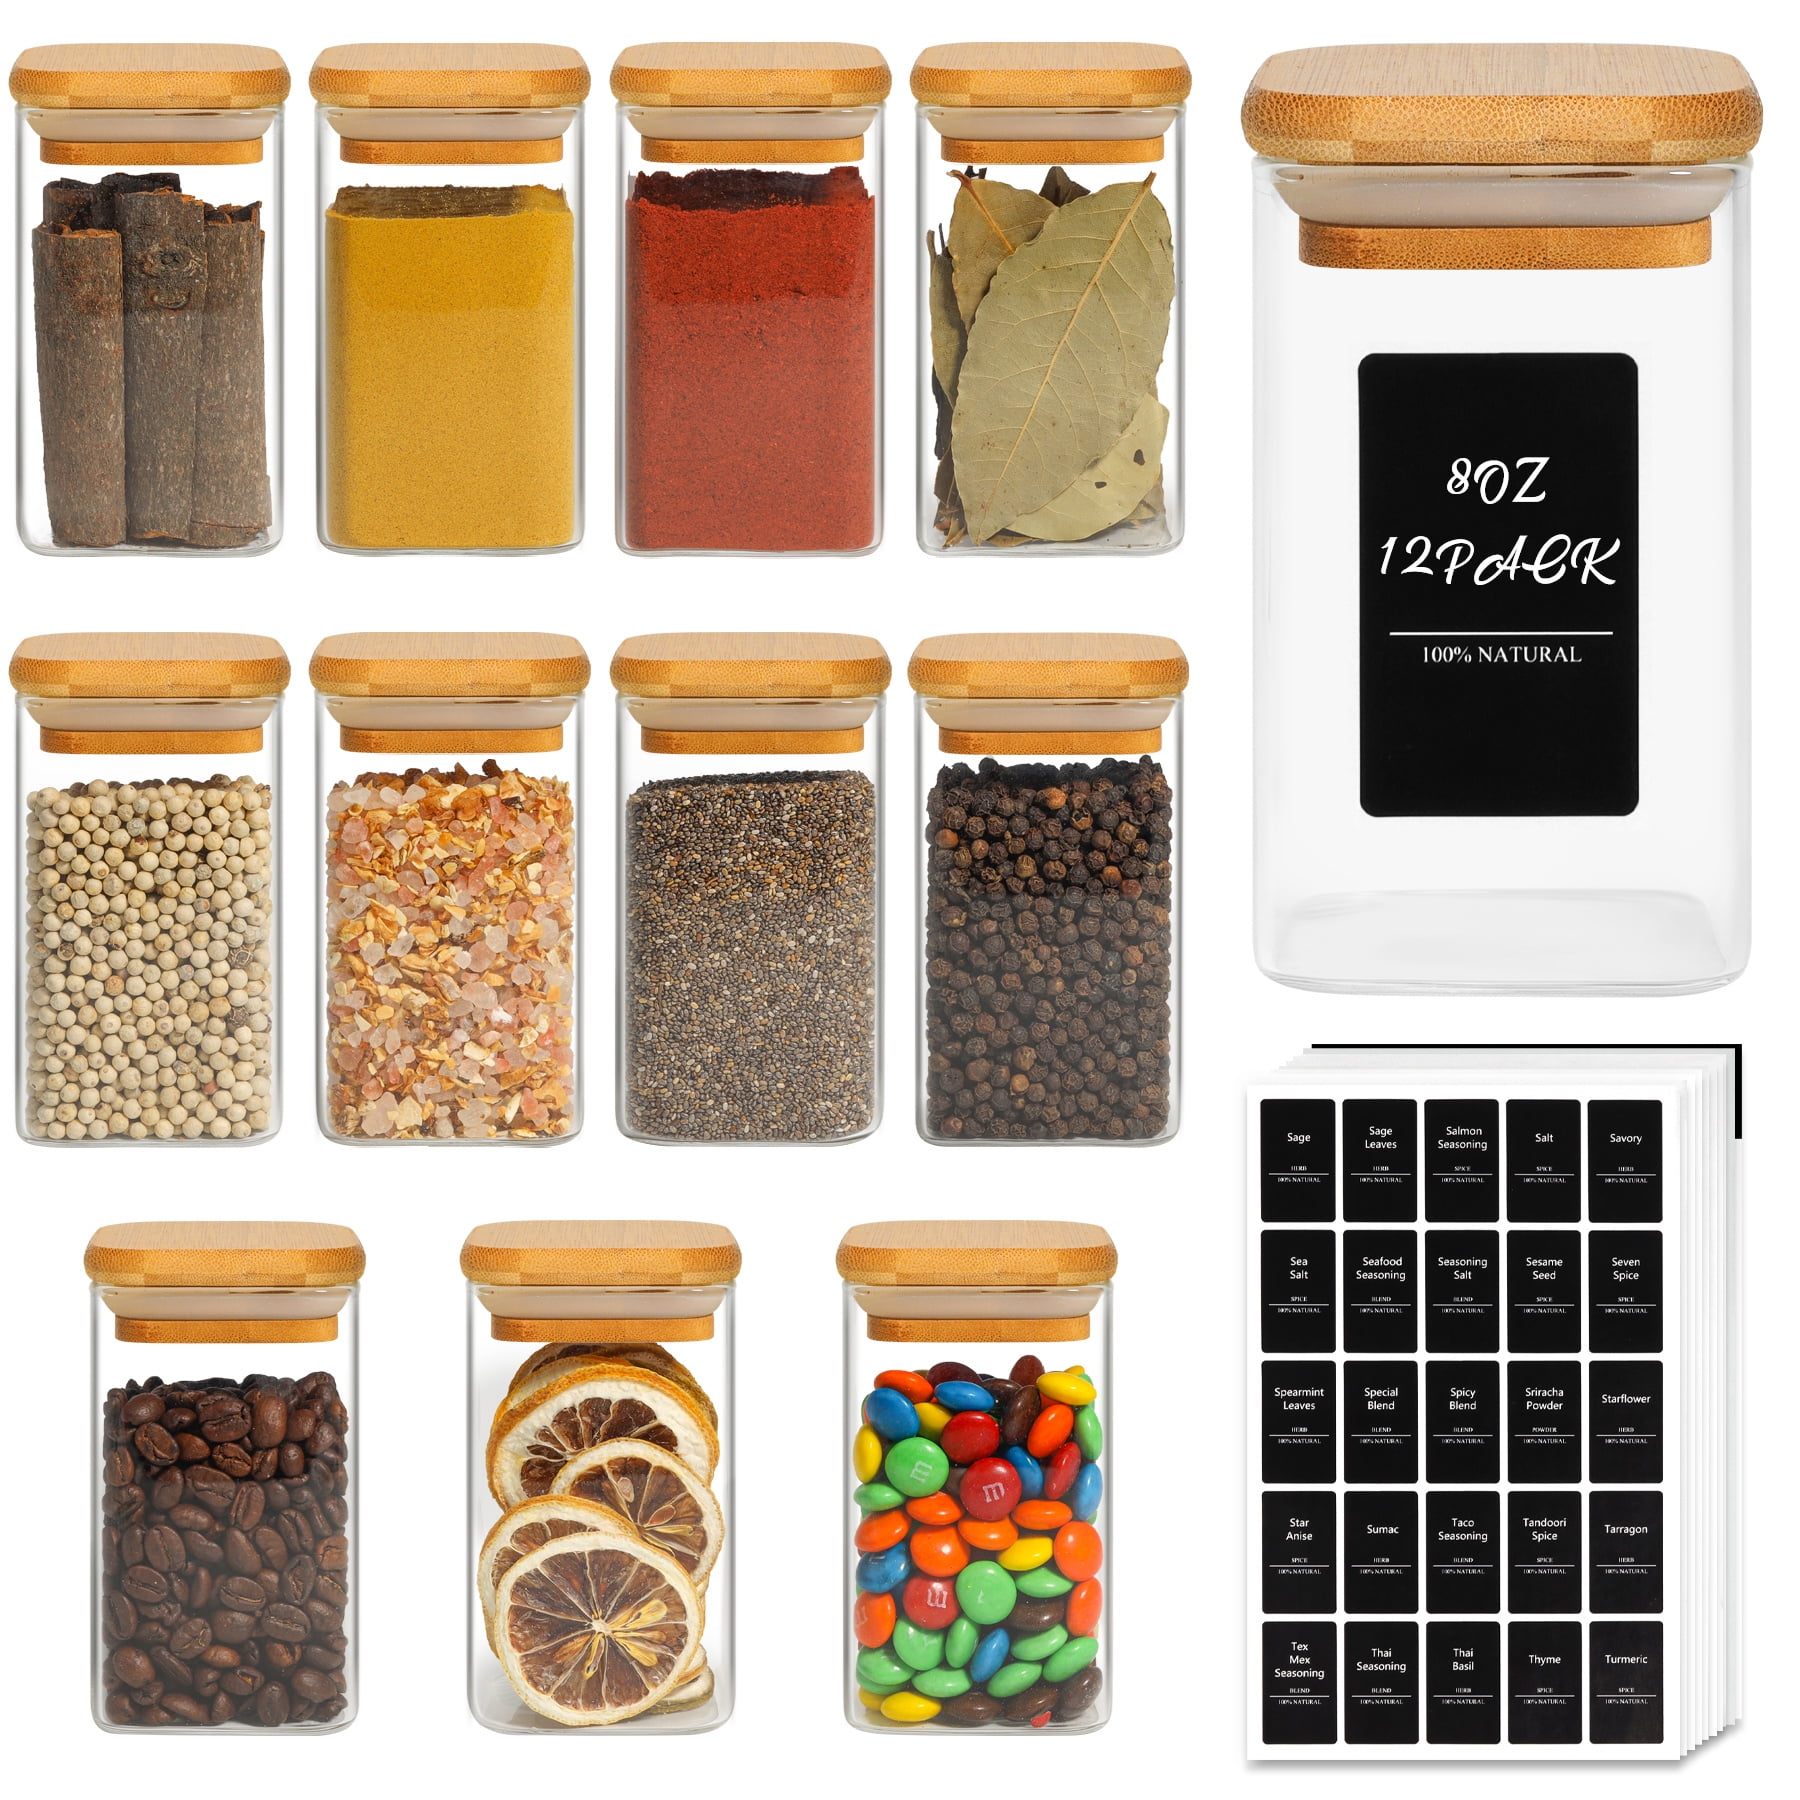 casato 4Oz Spice Jars, 14 Pack Glass Food Storage Jars Containers with  Airtight Bamboo Lids, High Borosilicate Glass Kitchen Canisters For Spice  and